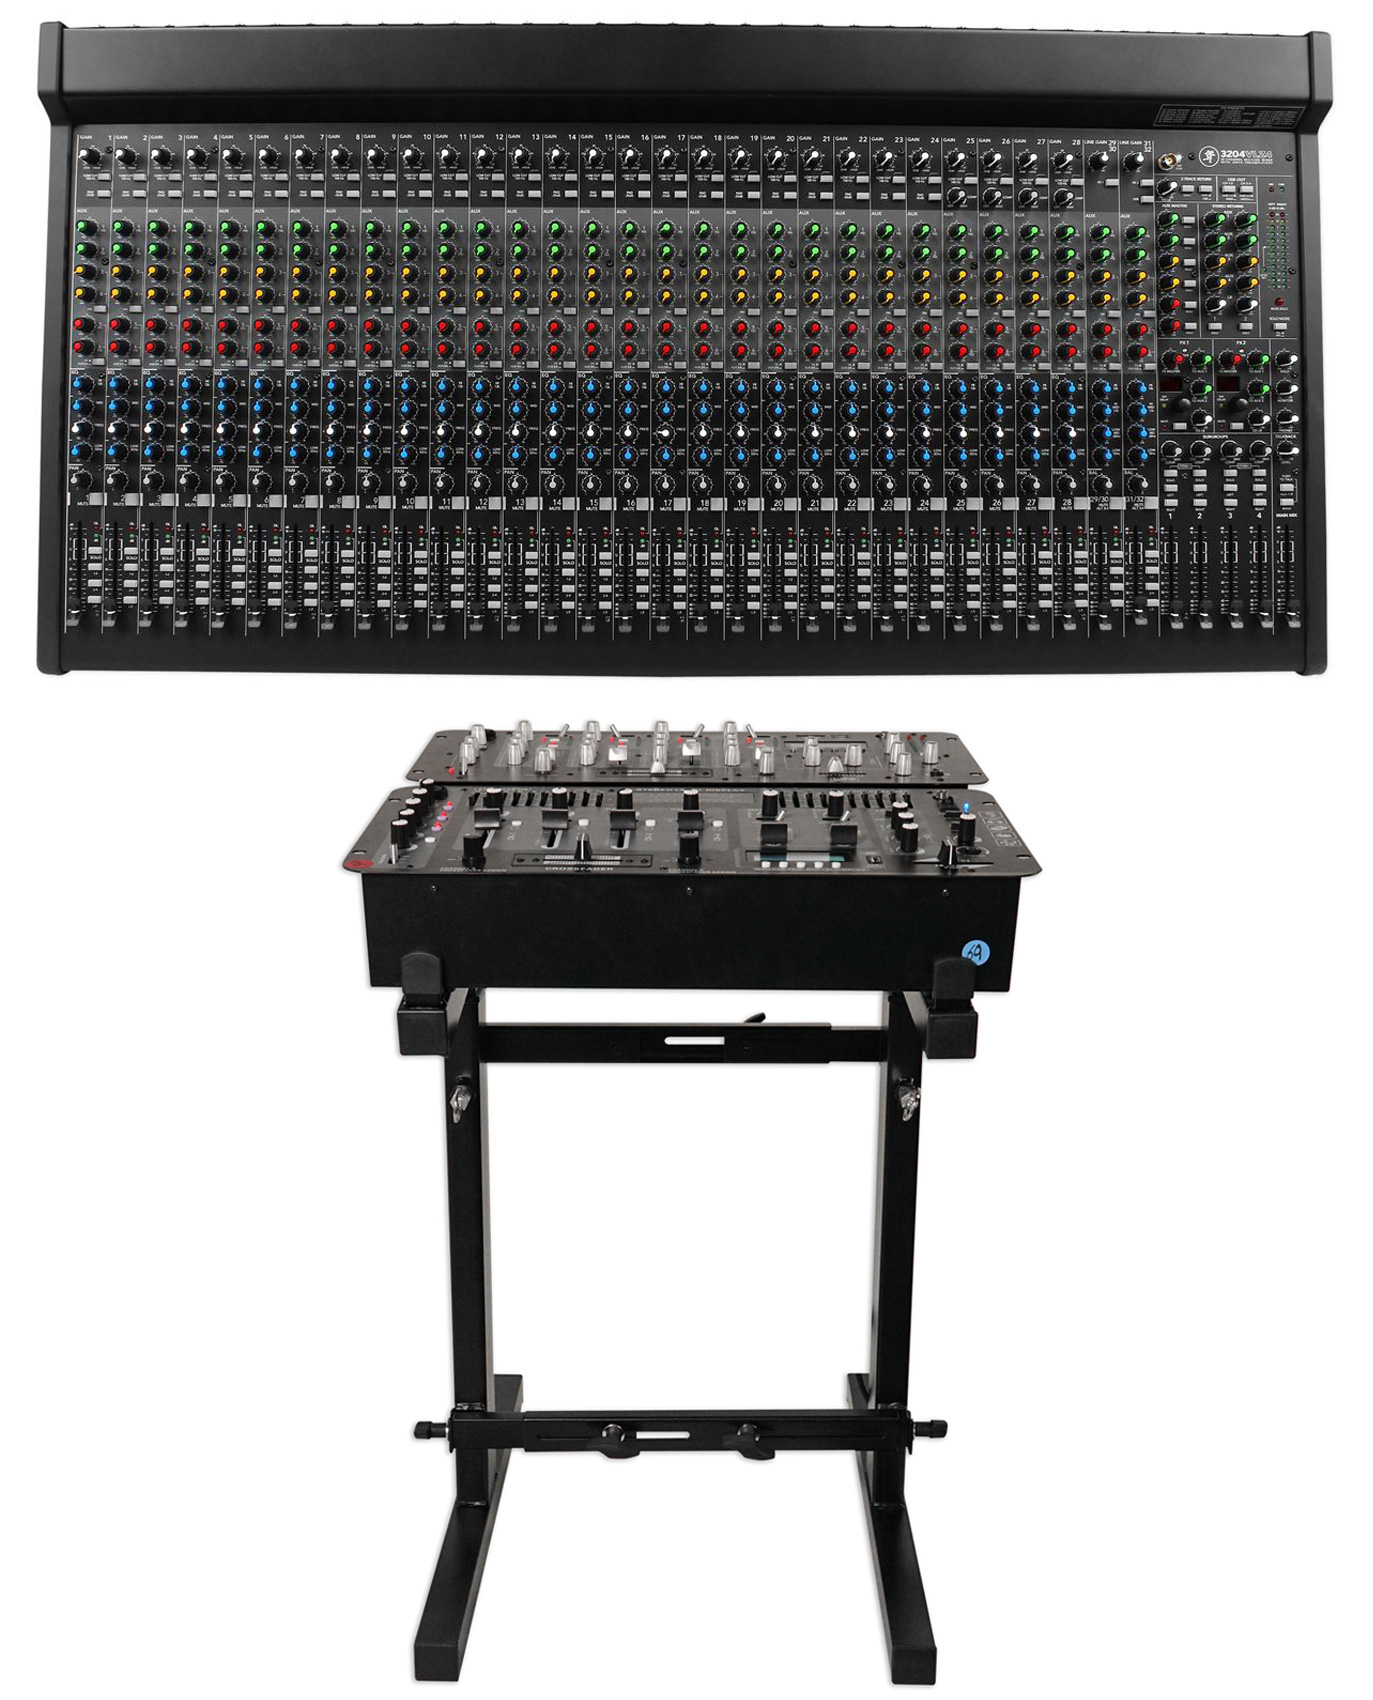 New Mackie 3204VLZ4 32-channel 4-Bus FX Mixer w/ USB 3204-VLZ4 + Mixer Stand - image 1 of 10